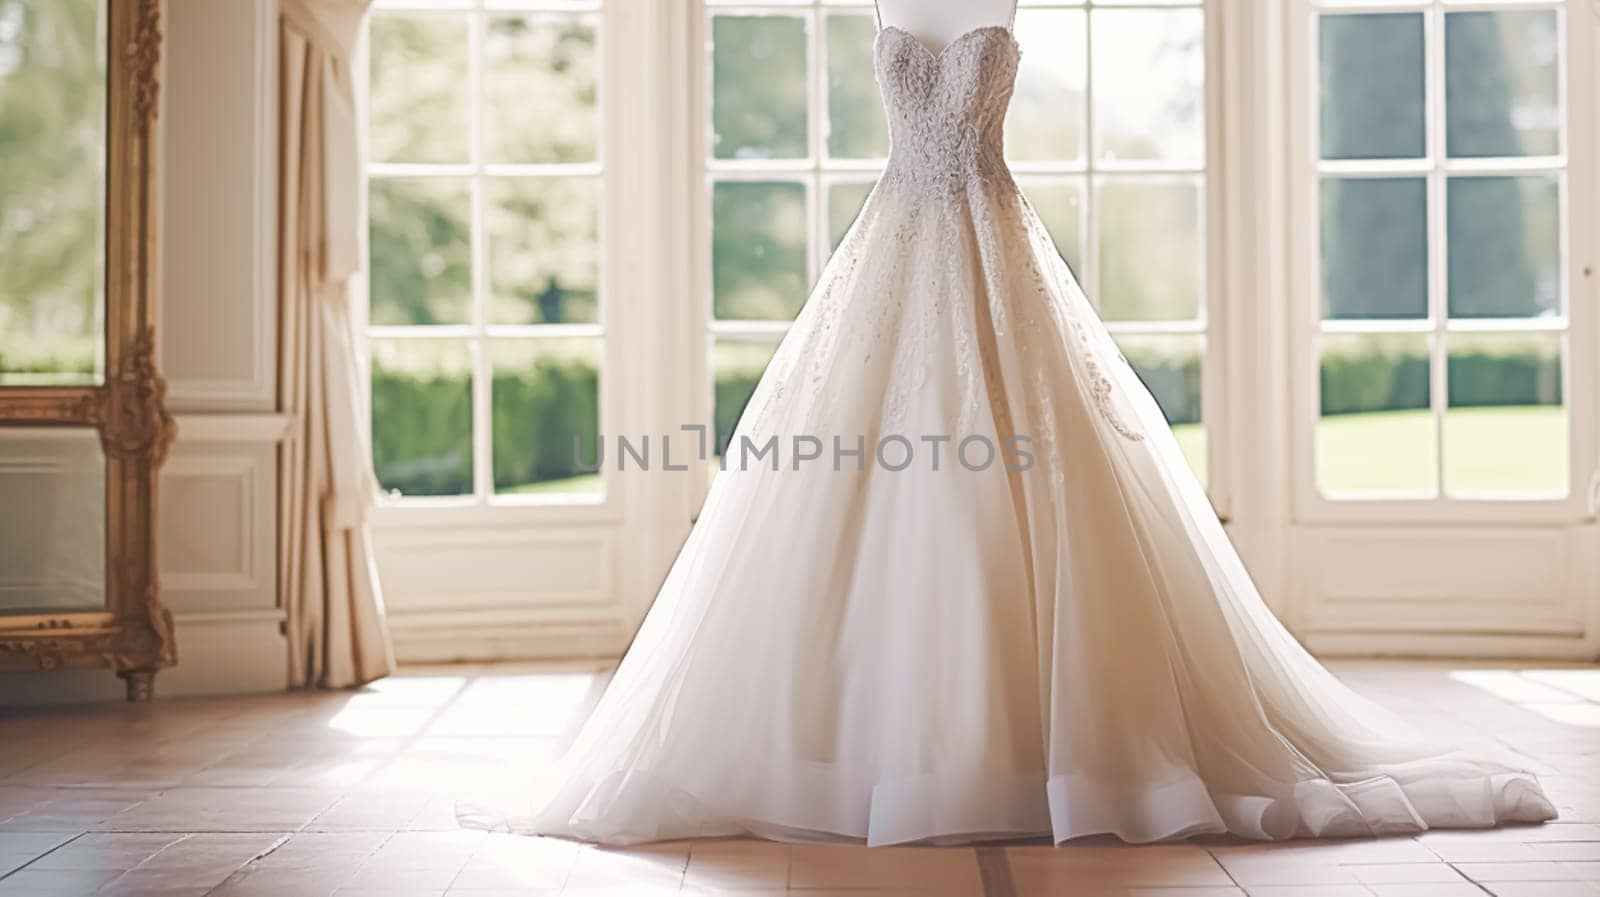 Wedding drees, bridal gown style and bespoke fashion, full-legth white tailored ball gown in showroom, tailor fitting, beauty and wedding by Anneleven